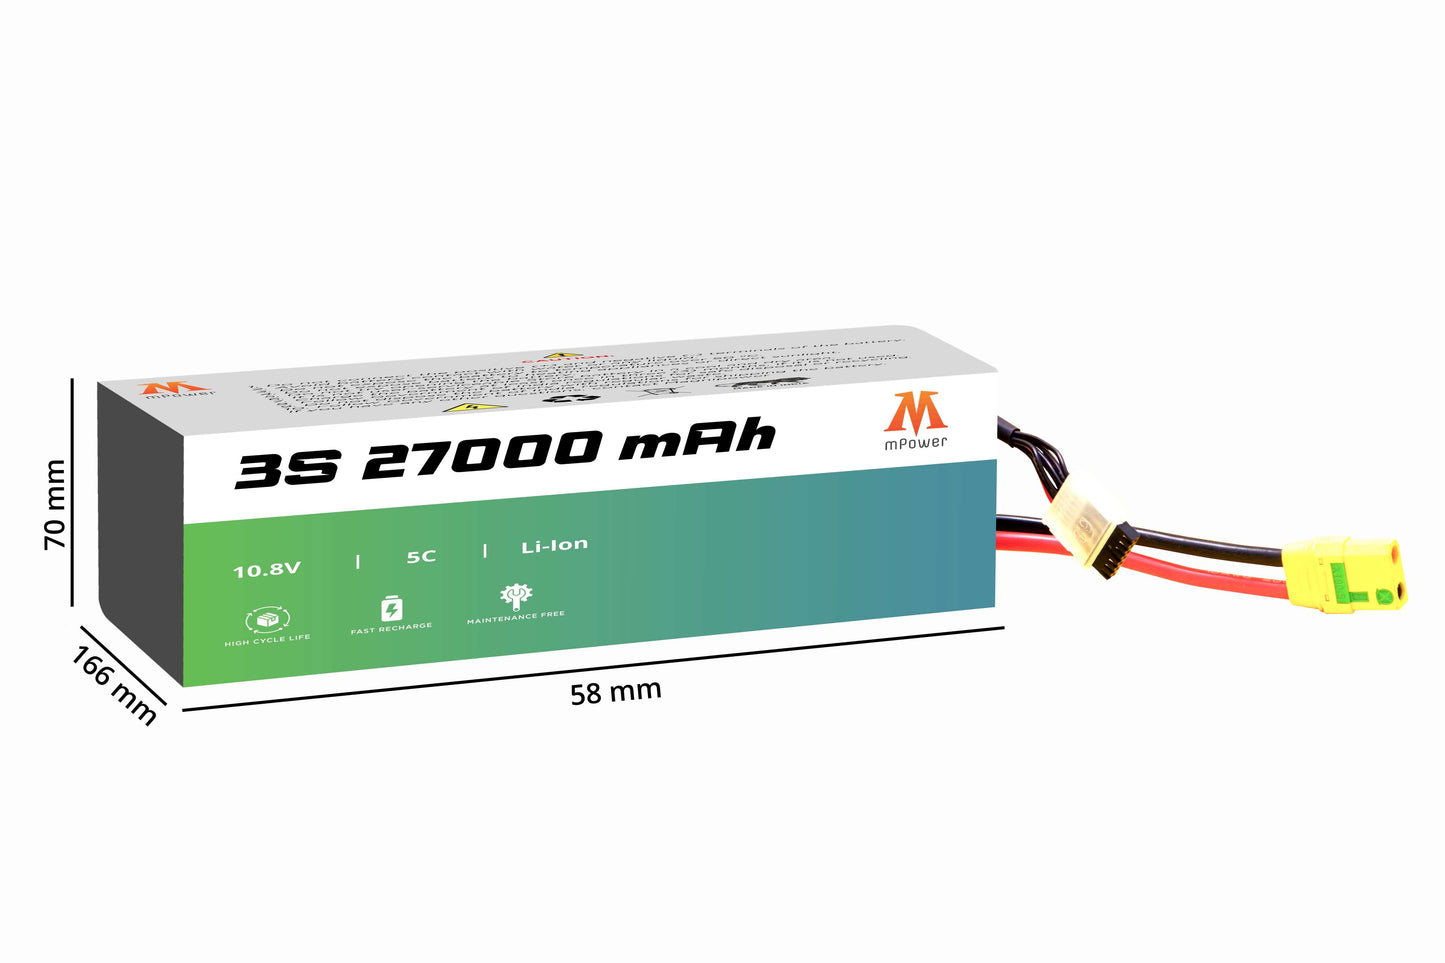 mPower 3S 27000mAh Lithium-Ion Battery for Surveillance Drones